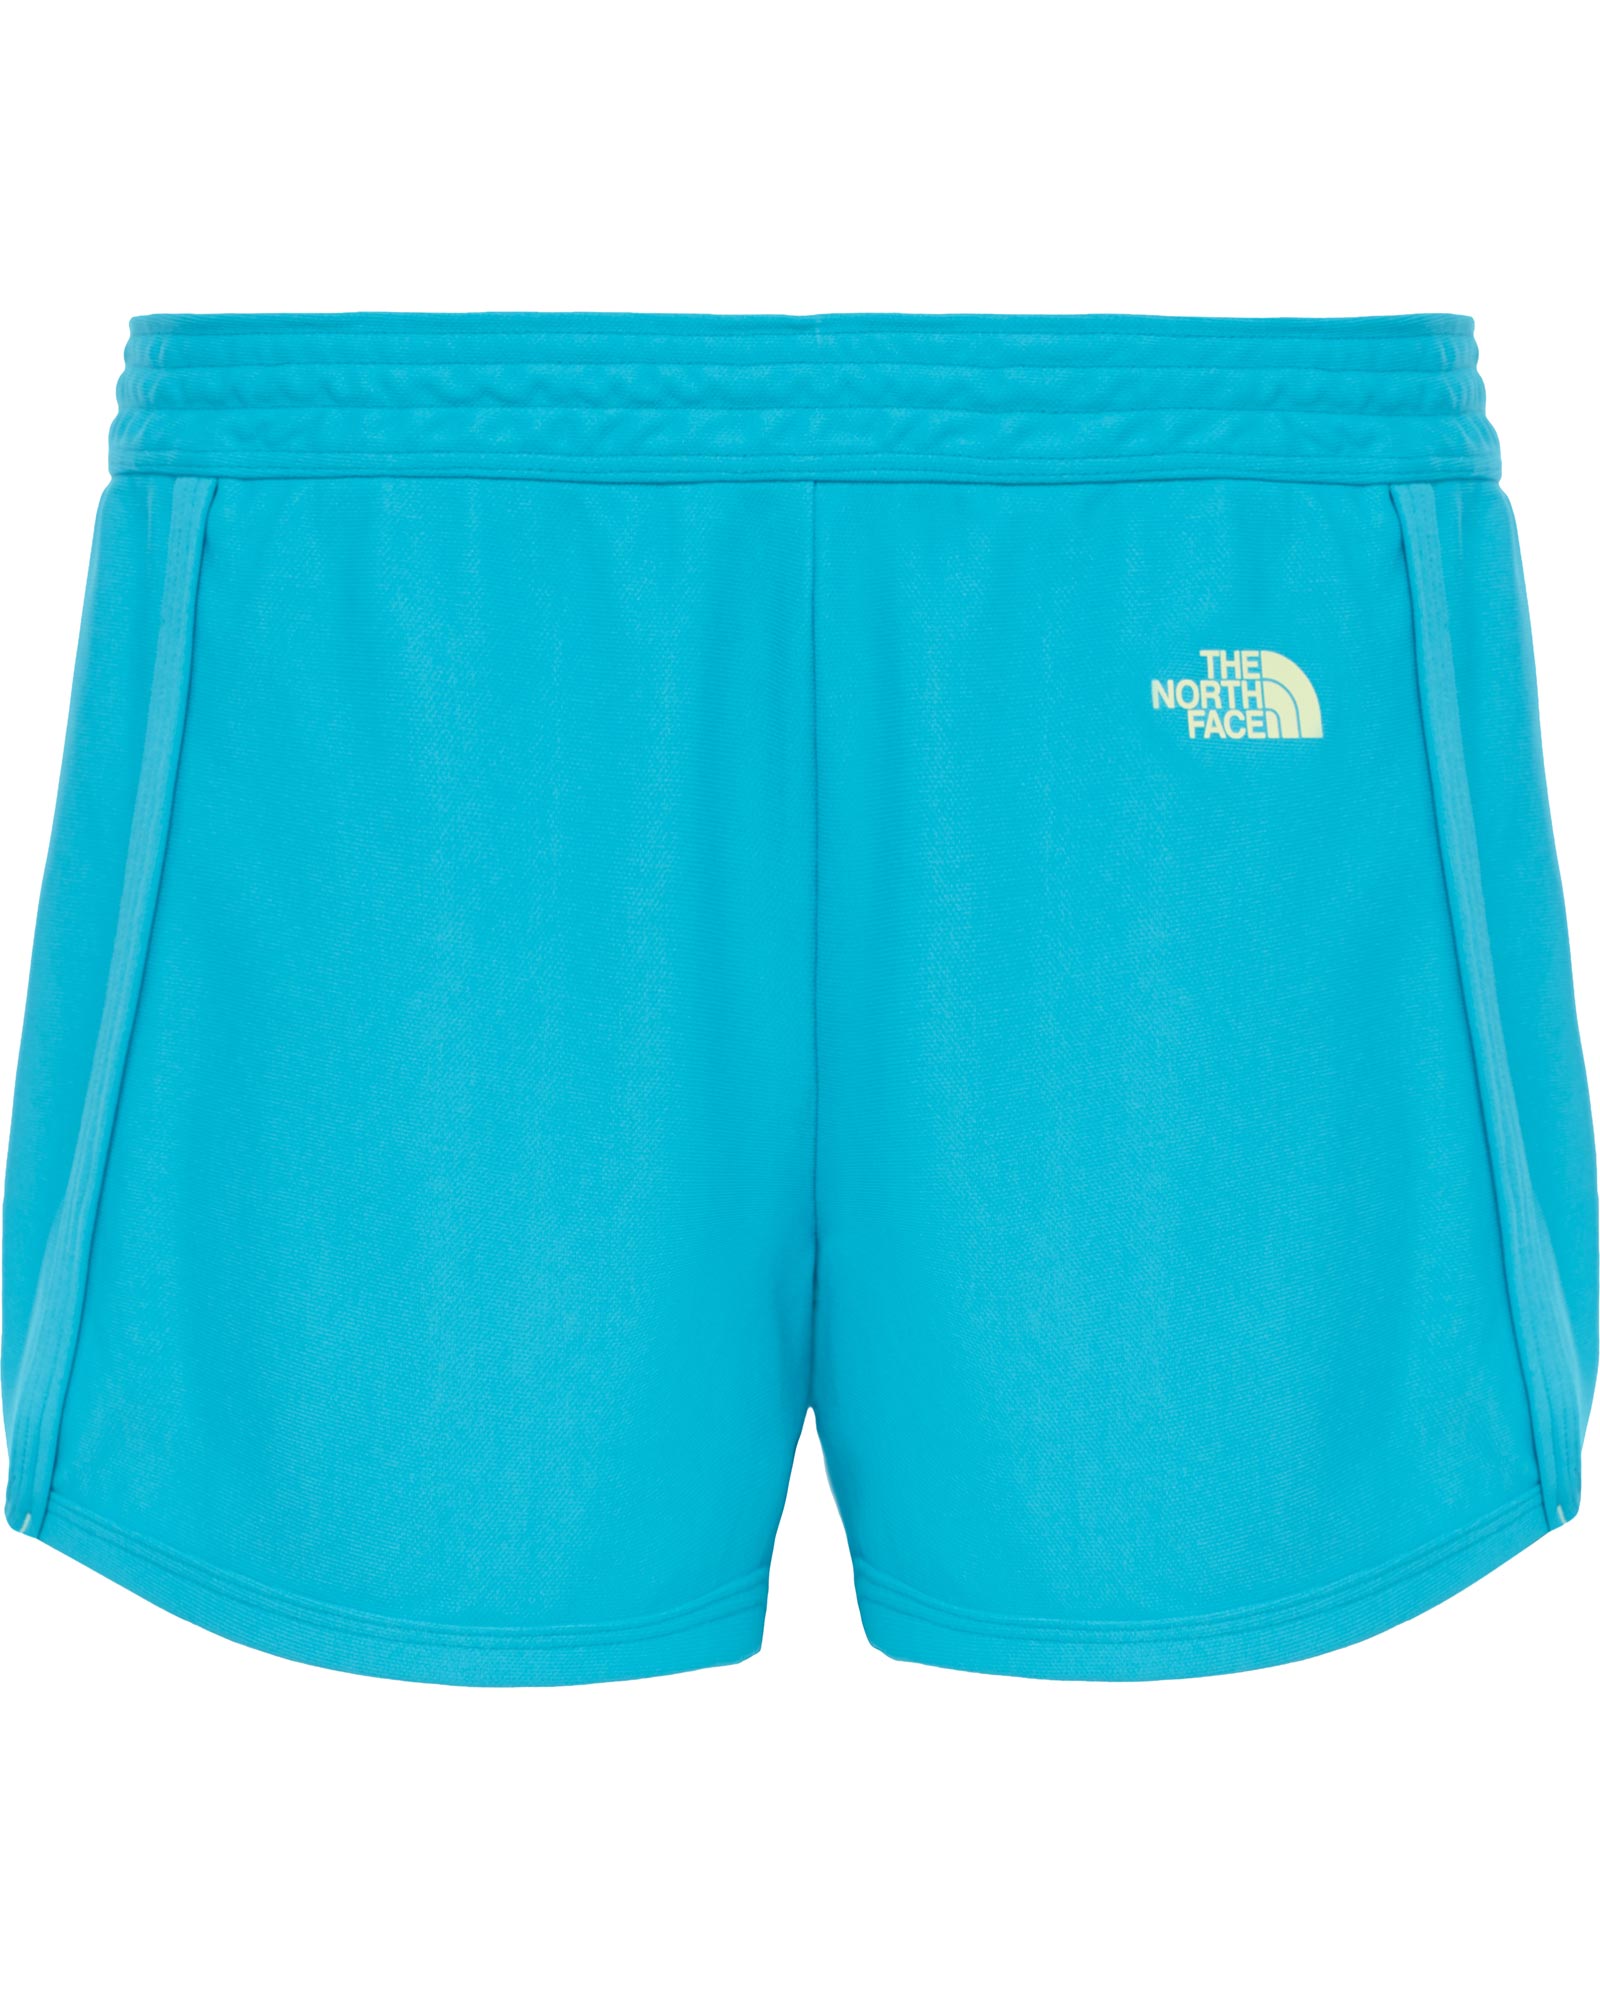 The North Face Pulse Women’s Shorts - Ink Spot Blue L